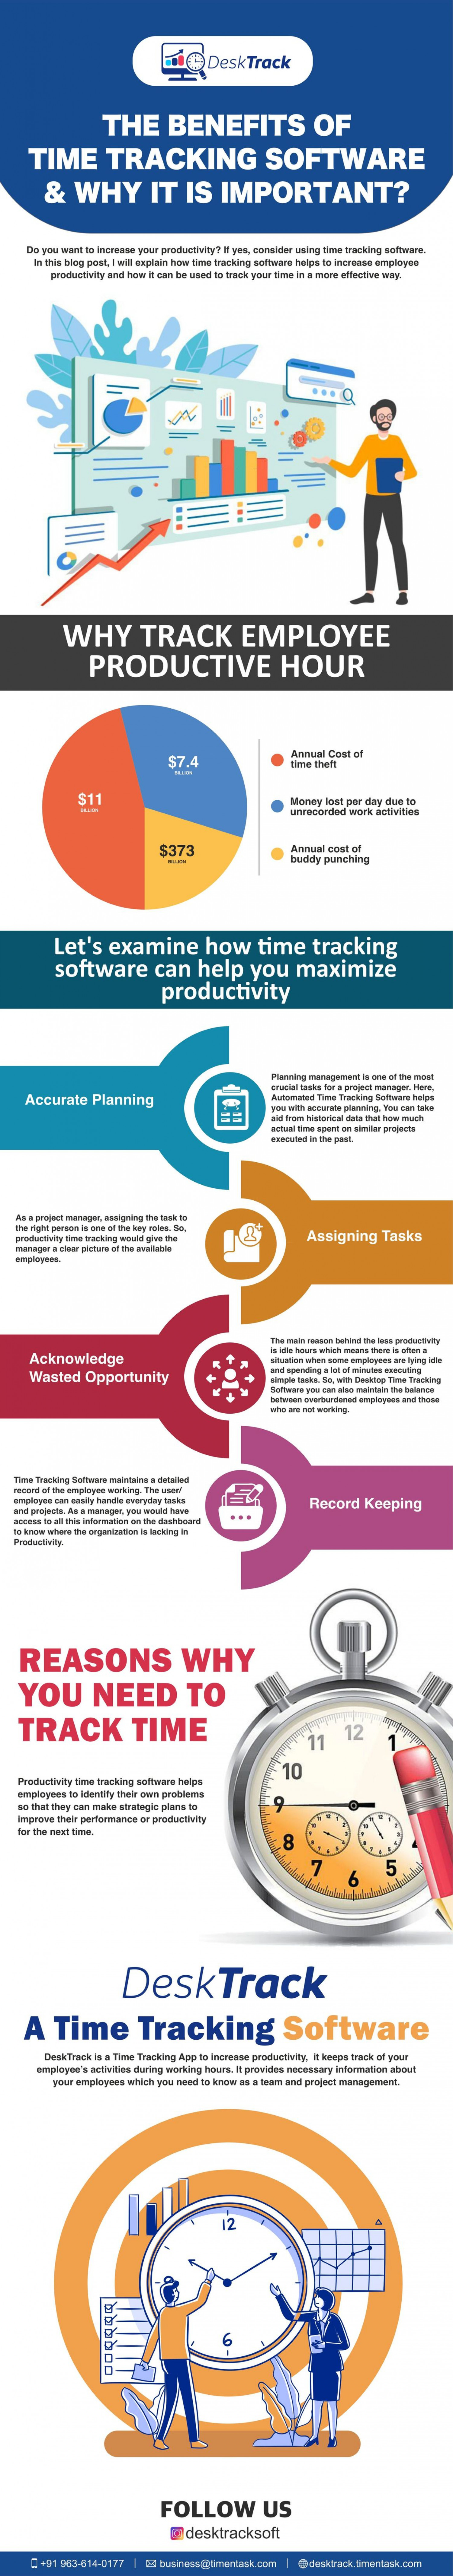 The Benefits of Time Tracking Software   Infographic